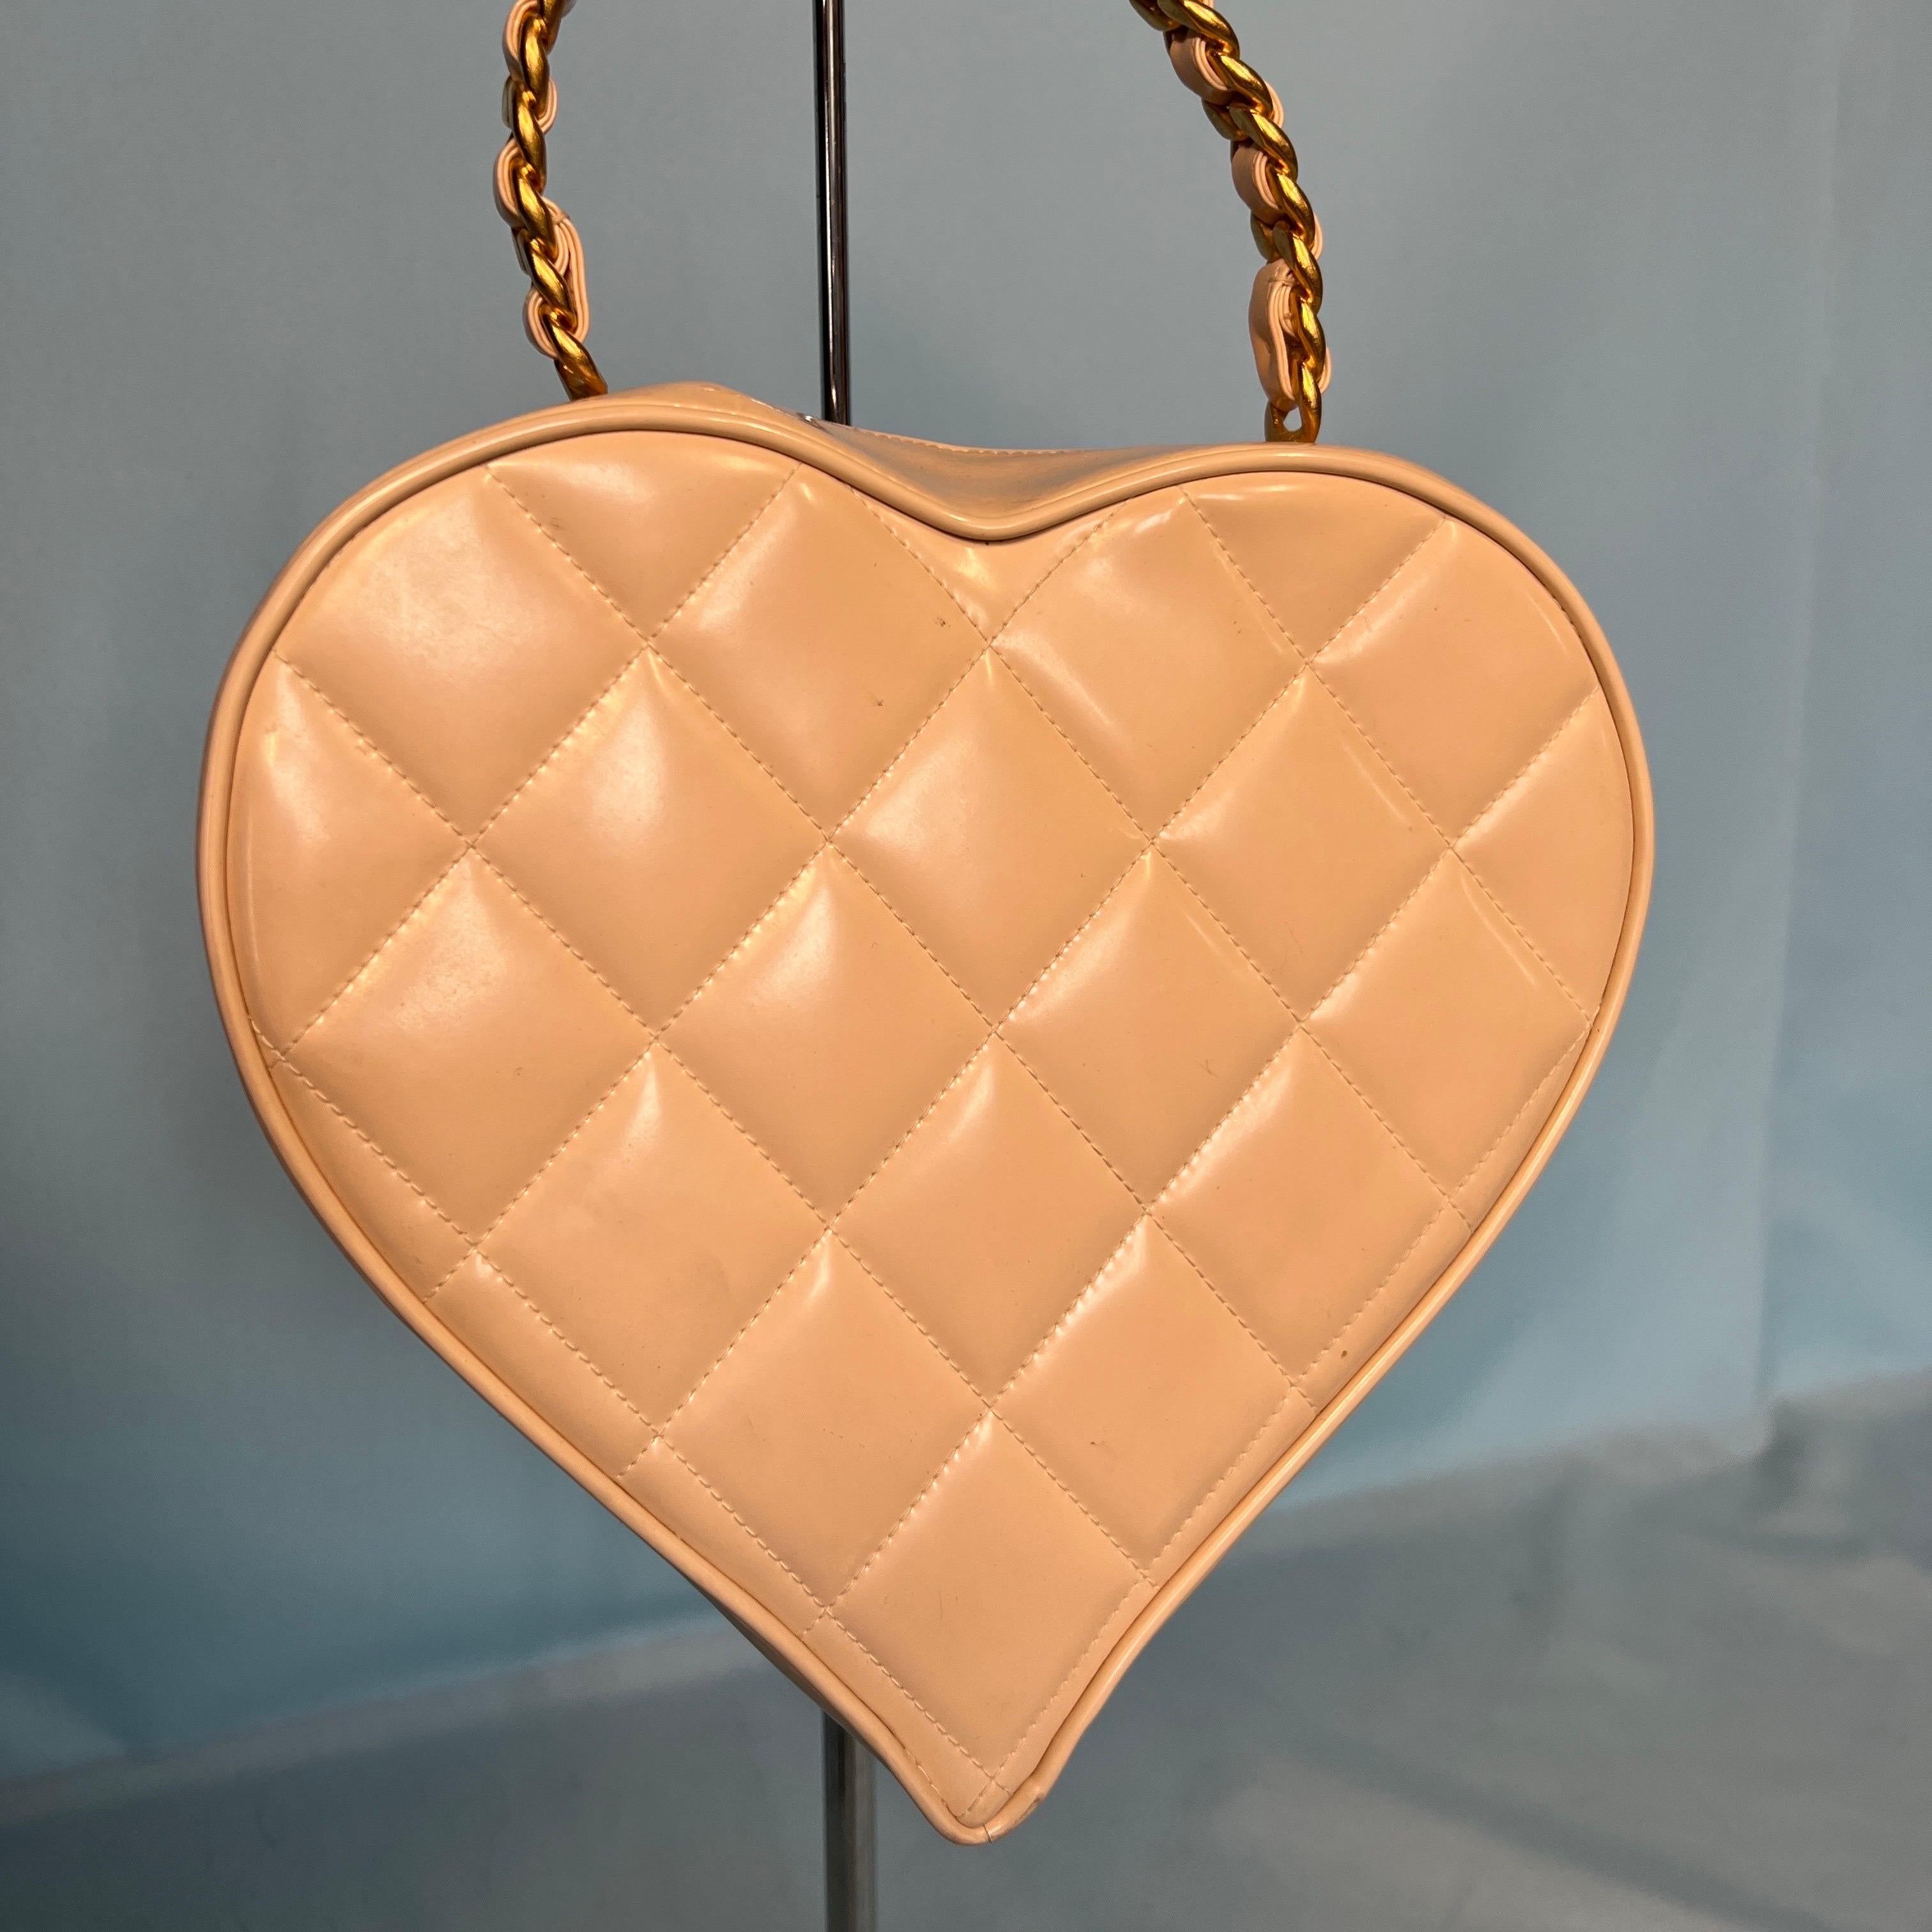 Chanel Spring 1995 Heart CC Patent Quilted Leather Bag 10